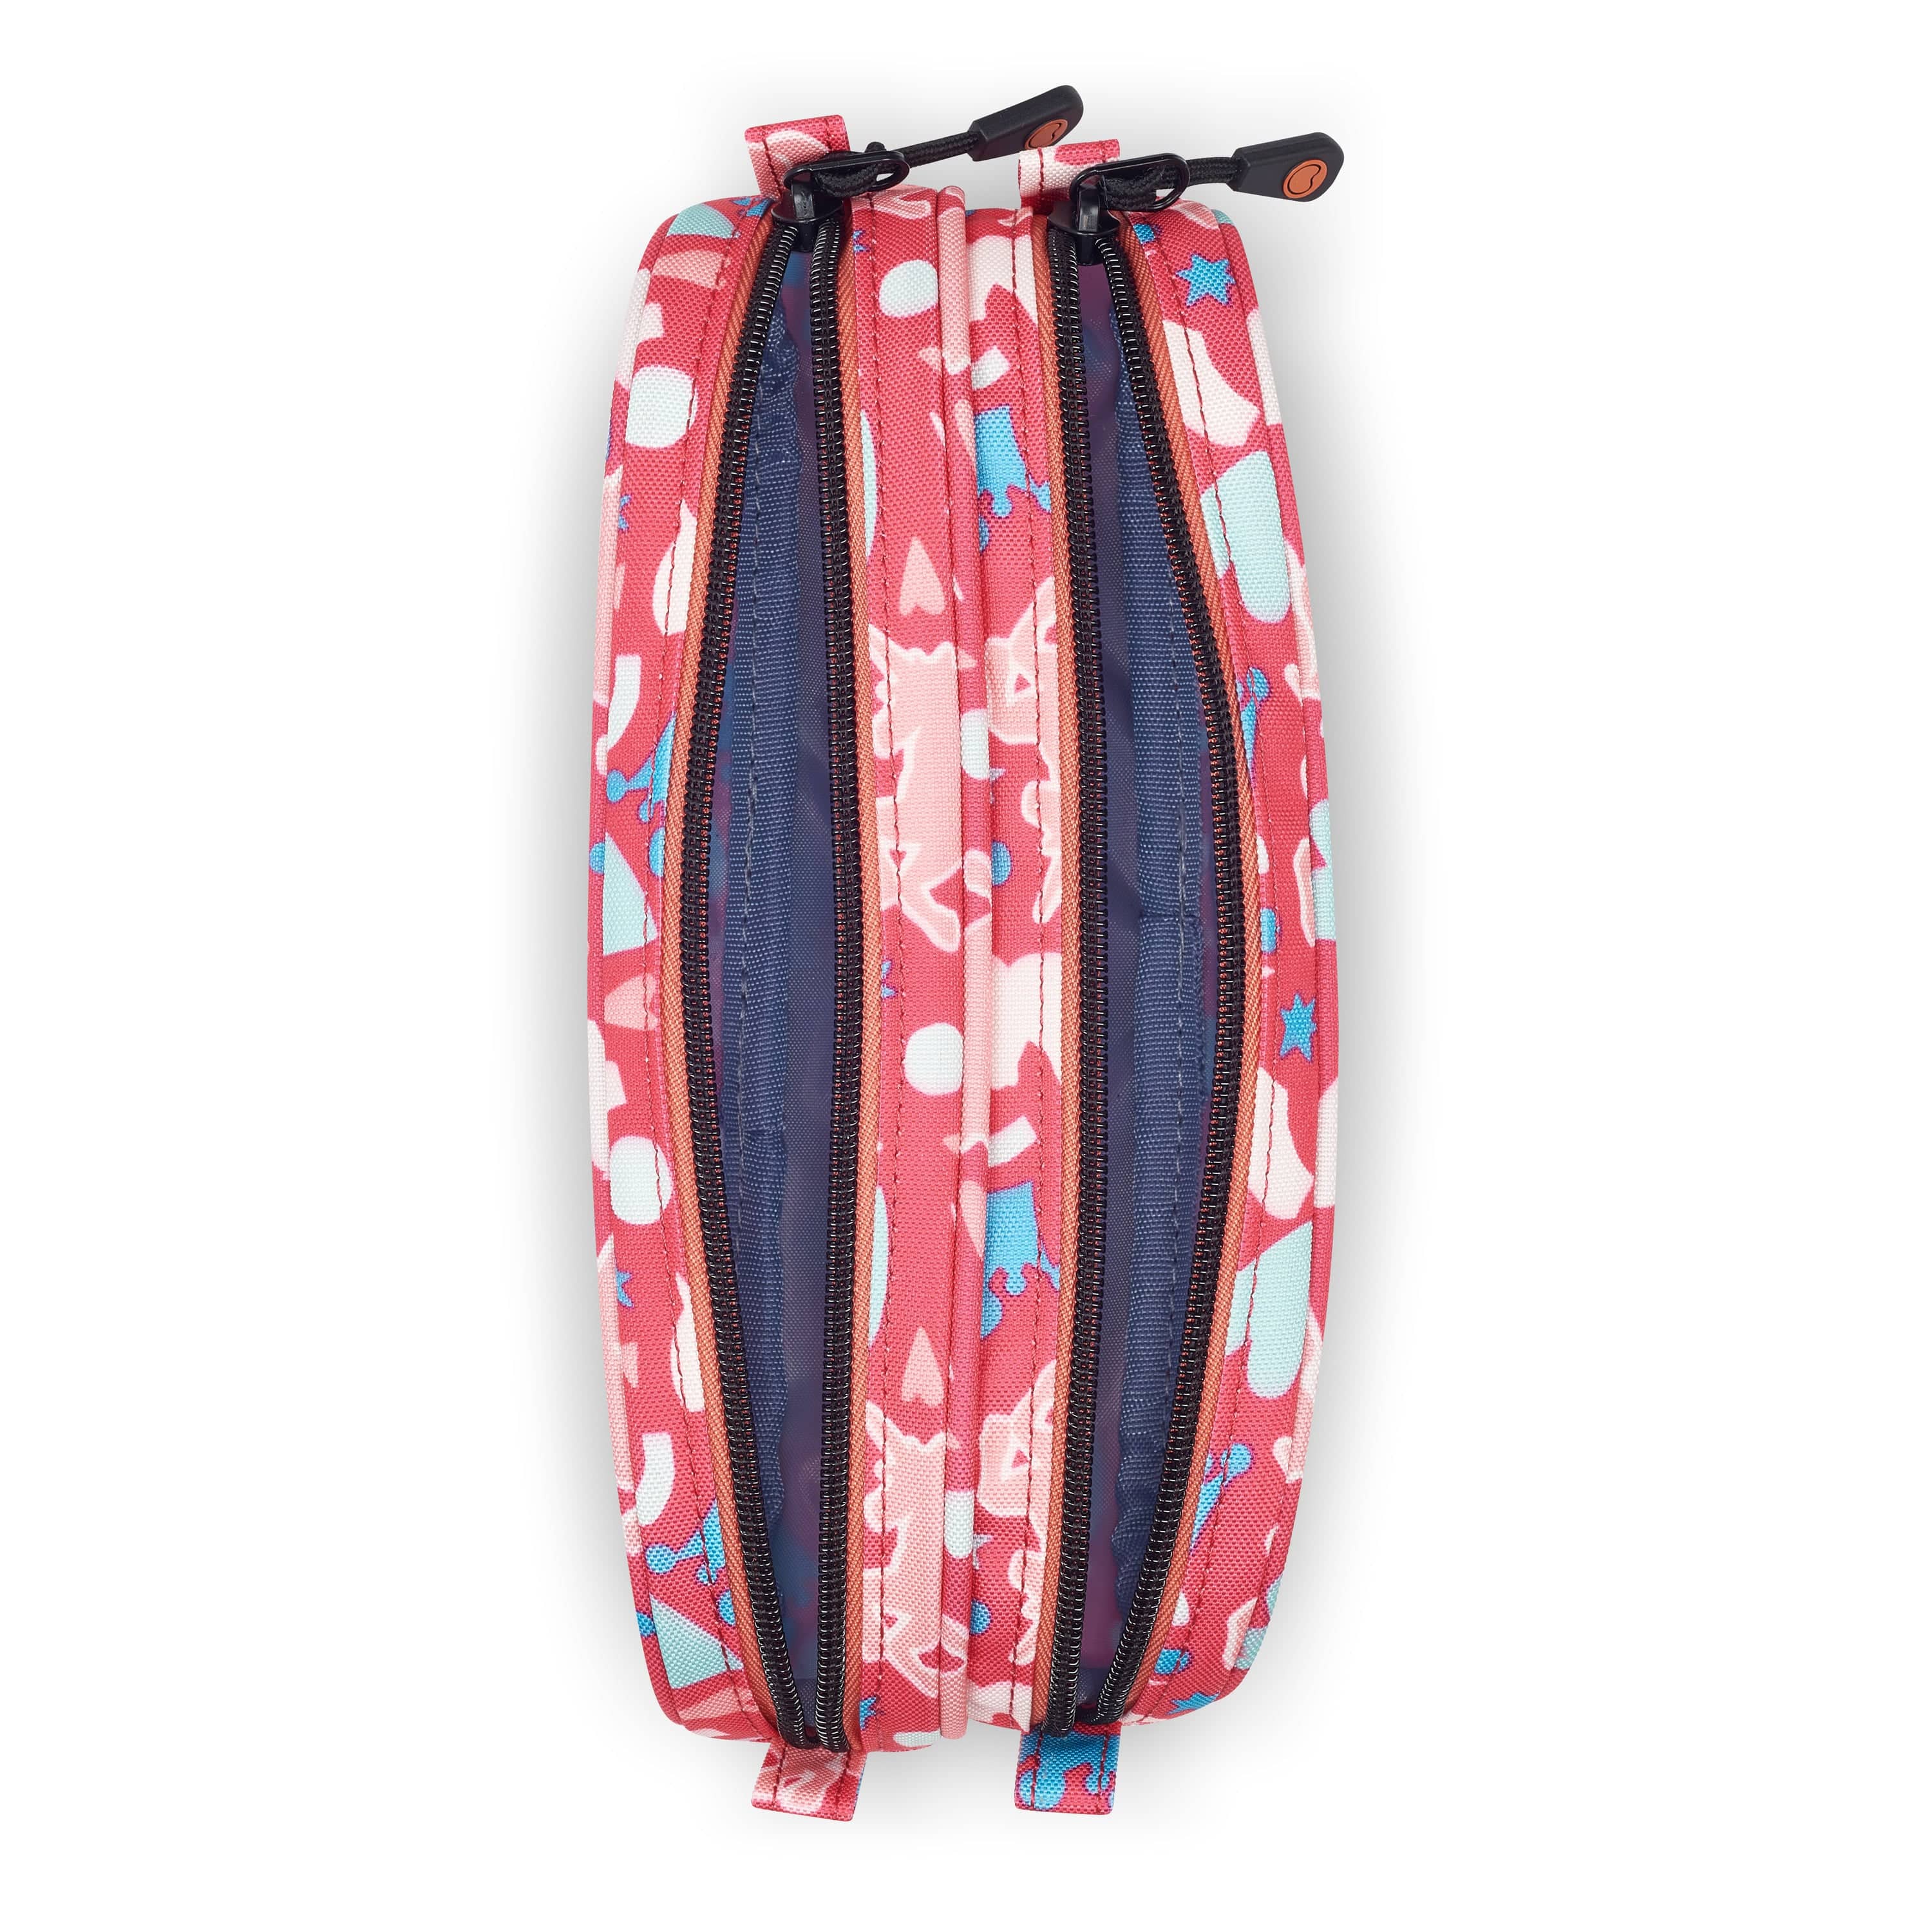 Delsey BTS 2022 Pencil Cases Pink Printing